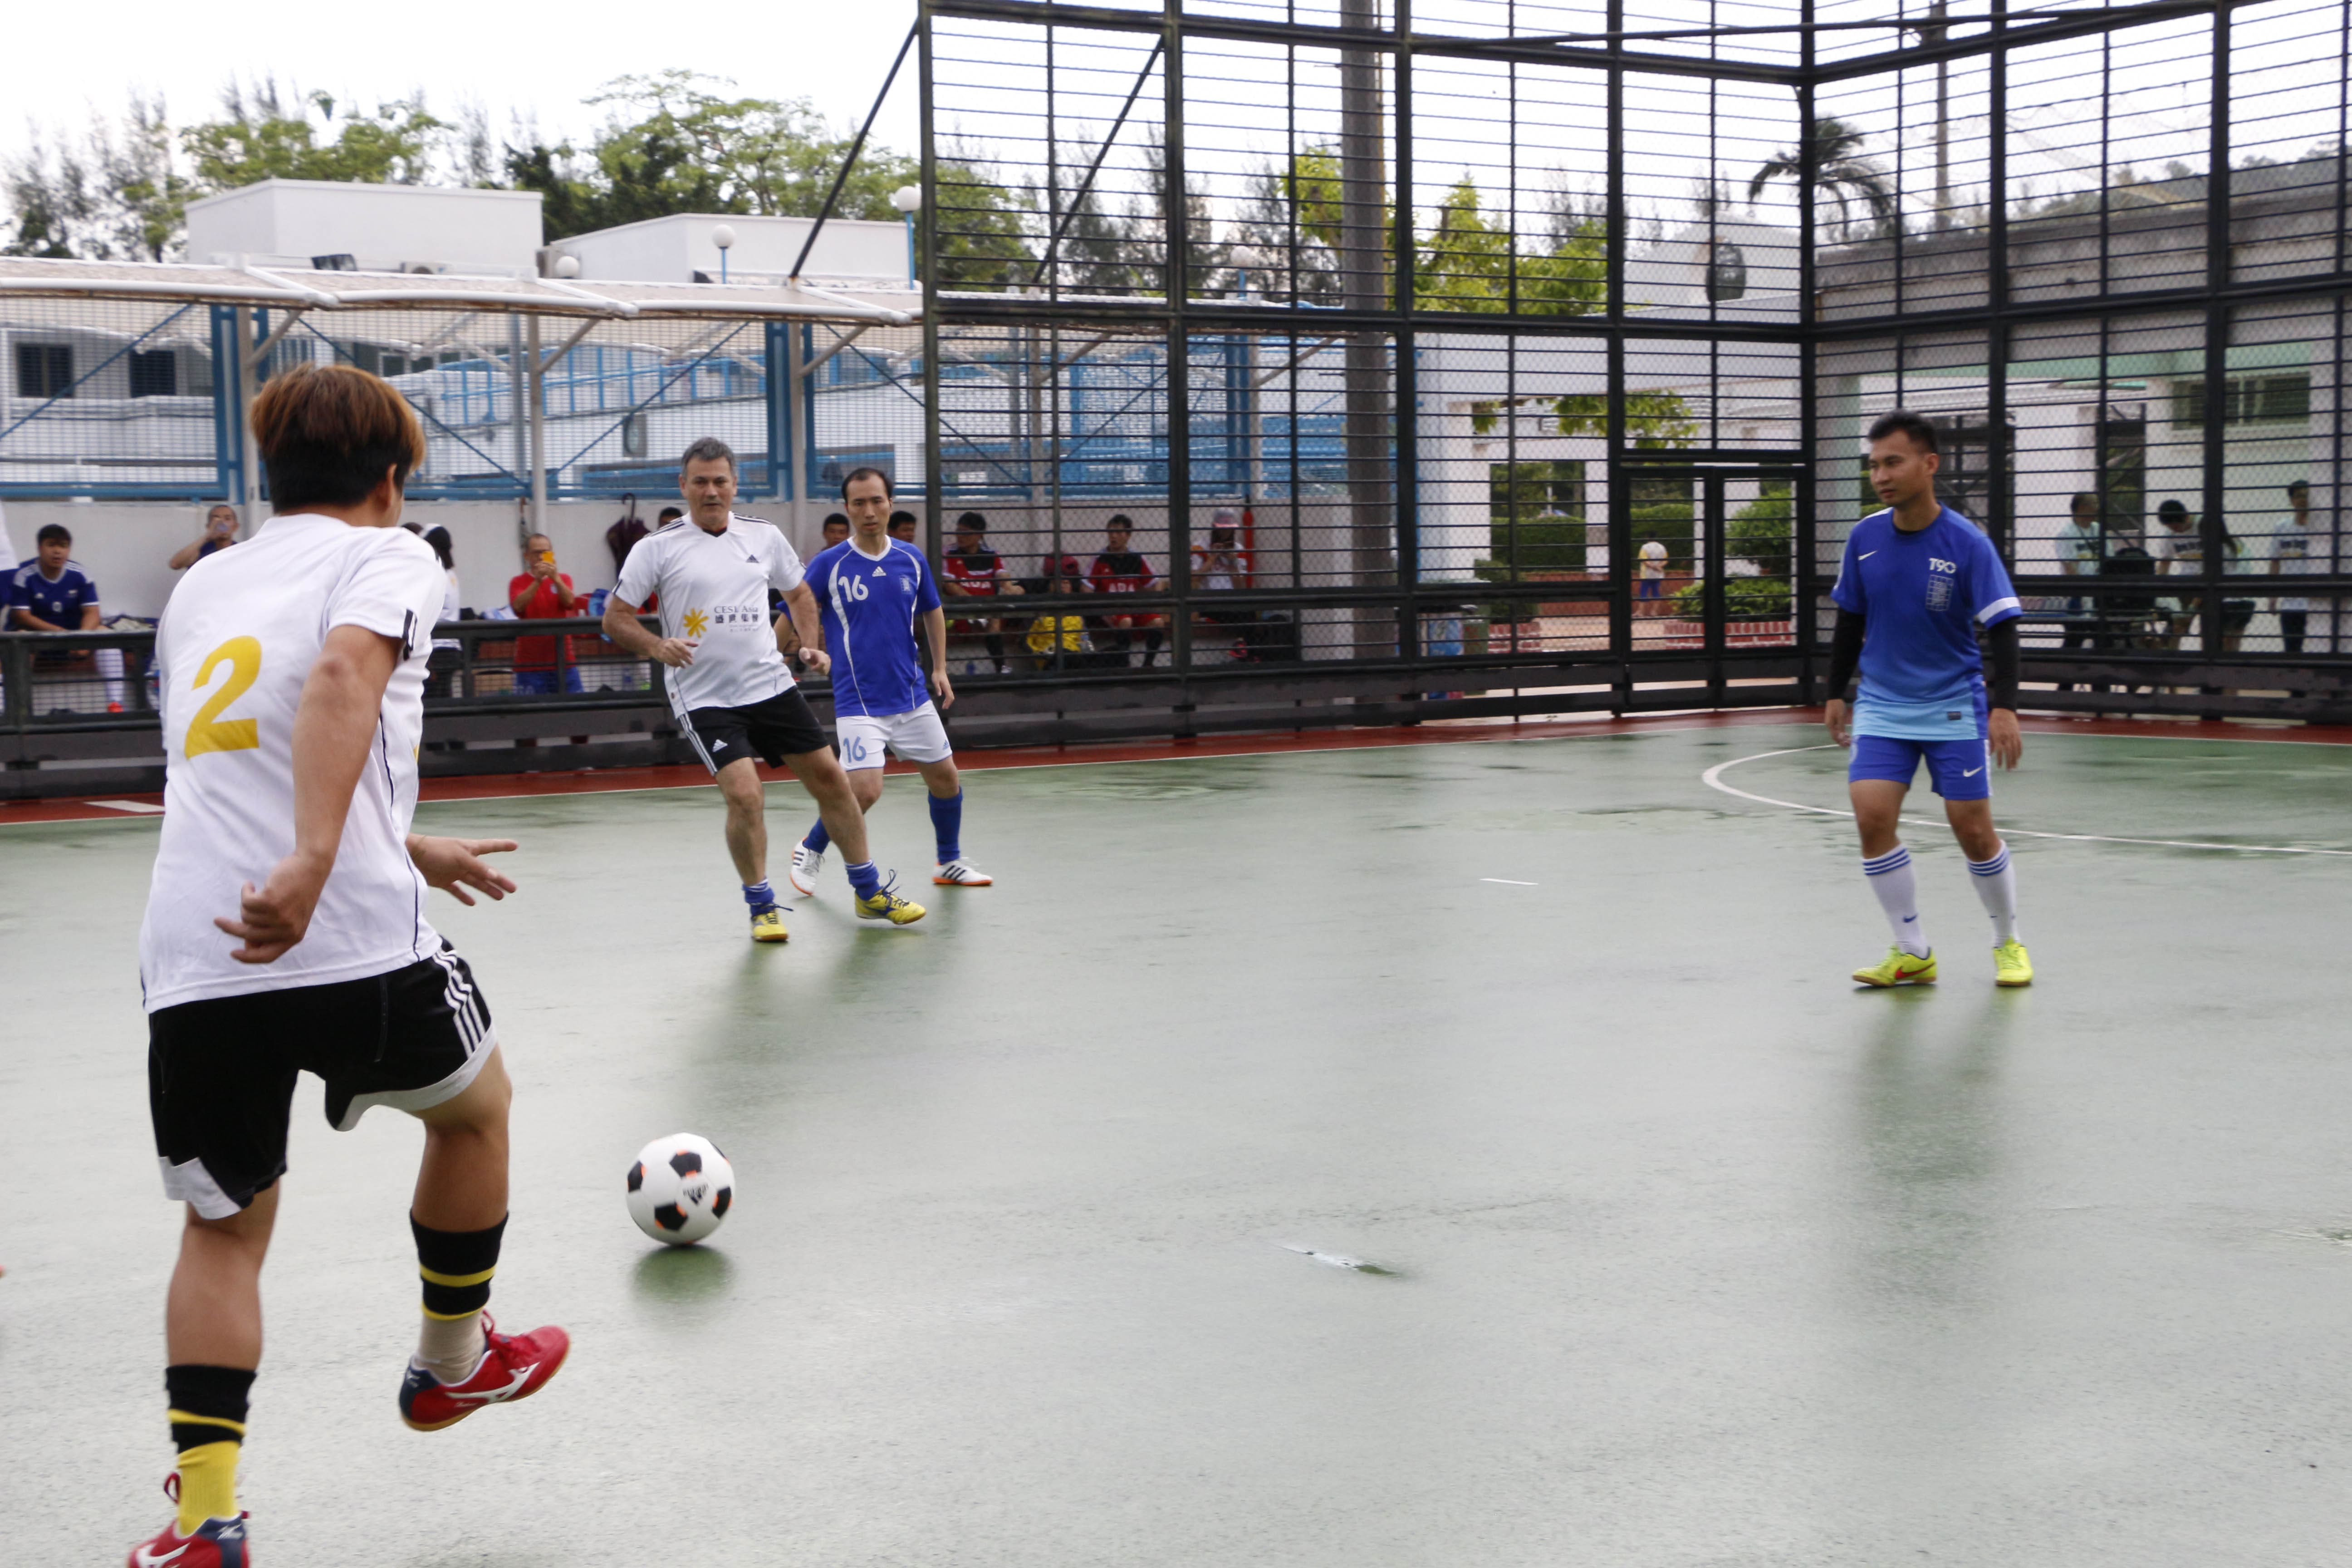 CESL Asia held Charity Football Tournament to raise funds for Macau Special Olympics